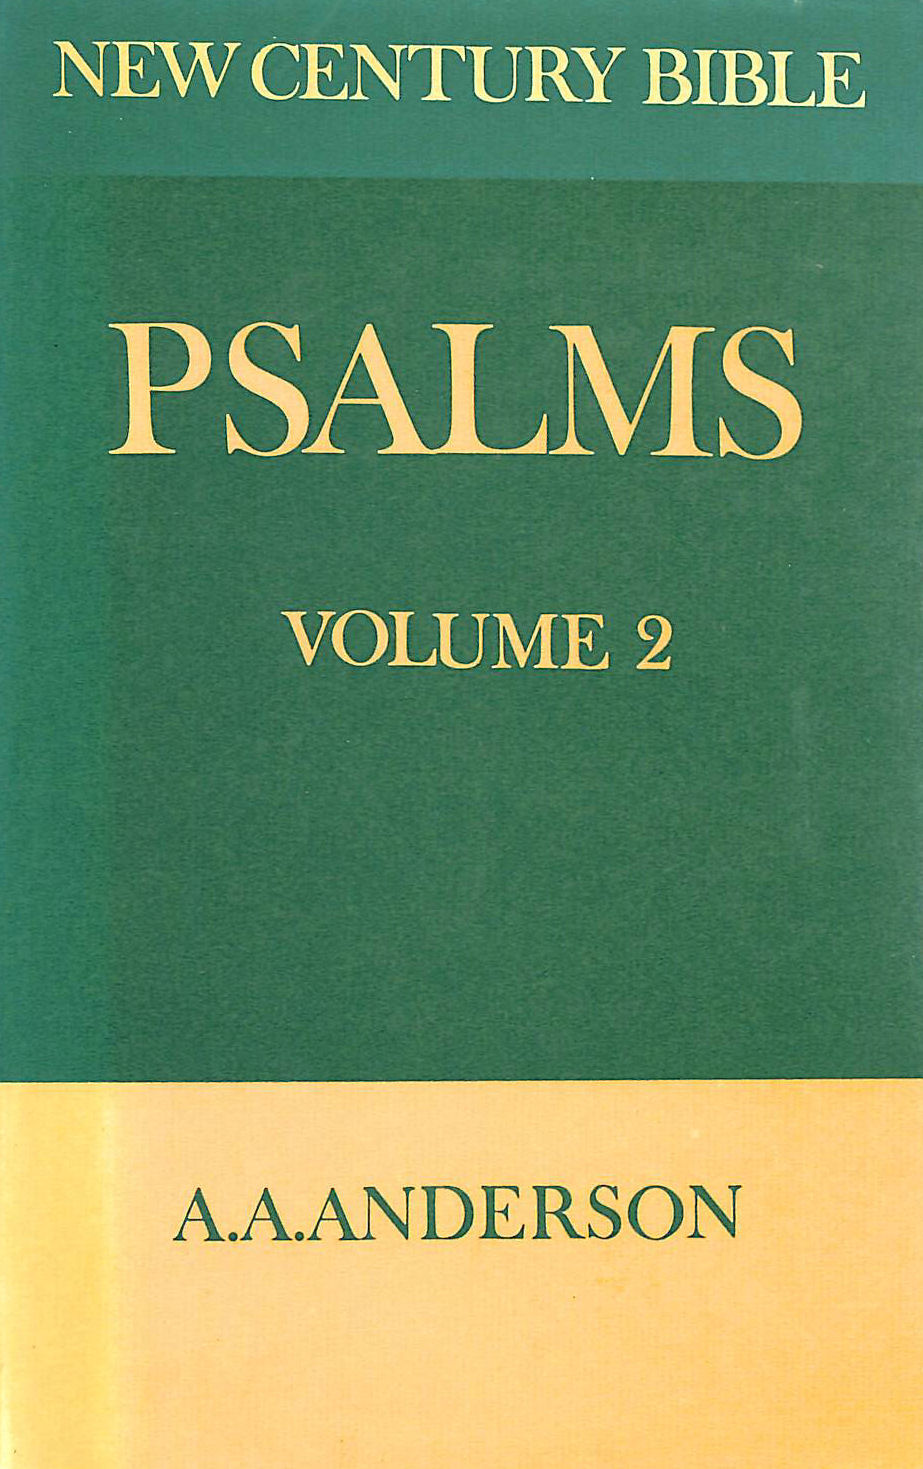 ANDERSON, A. A - The Book of Psalms: Volume 2 (New century Bible)